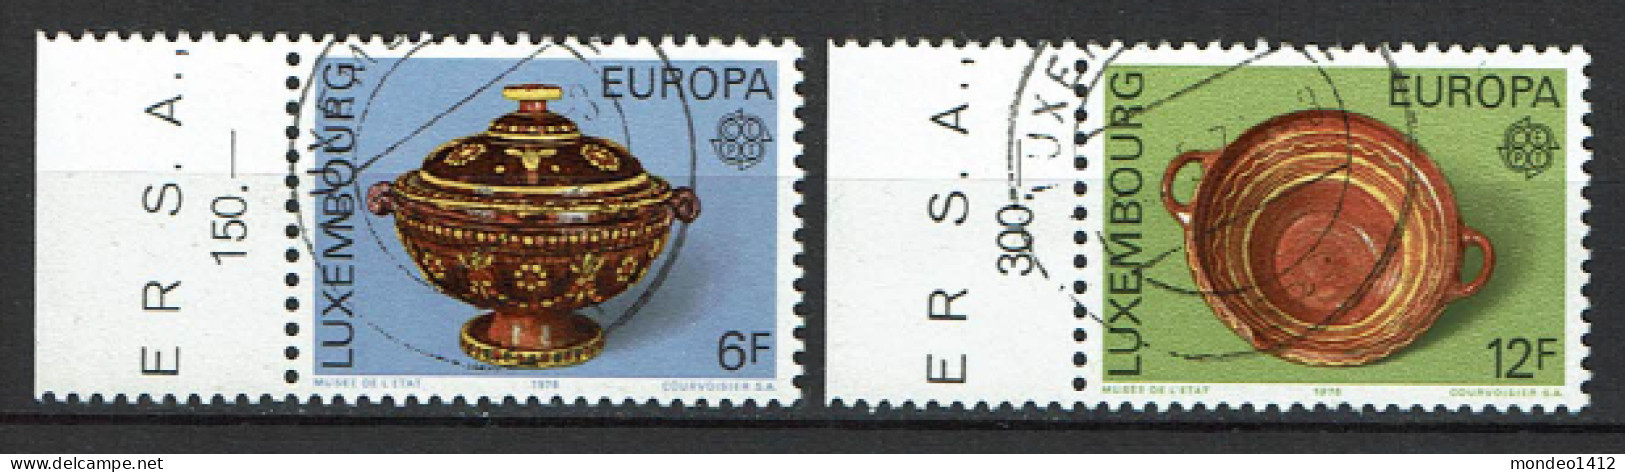 Luxembourg 1975 - YT 878/879 - EUROPA Stamps - Handicrafts, Oeuvres Artisanales - Gebraucht